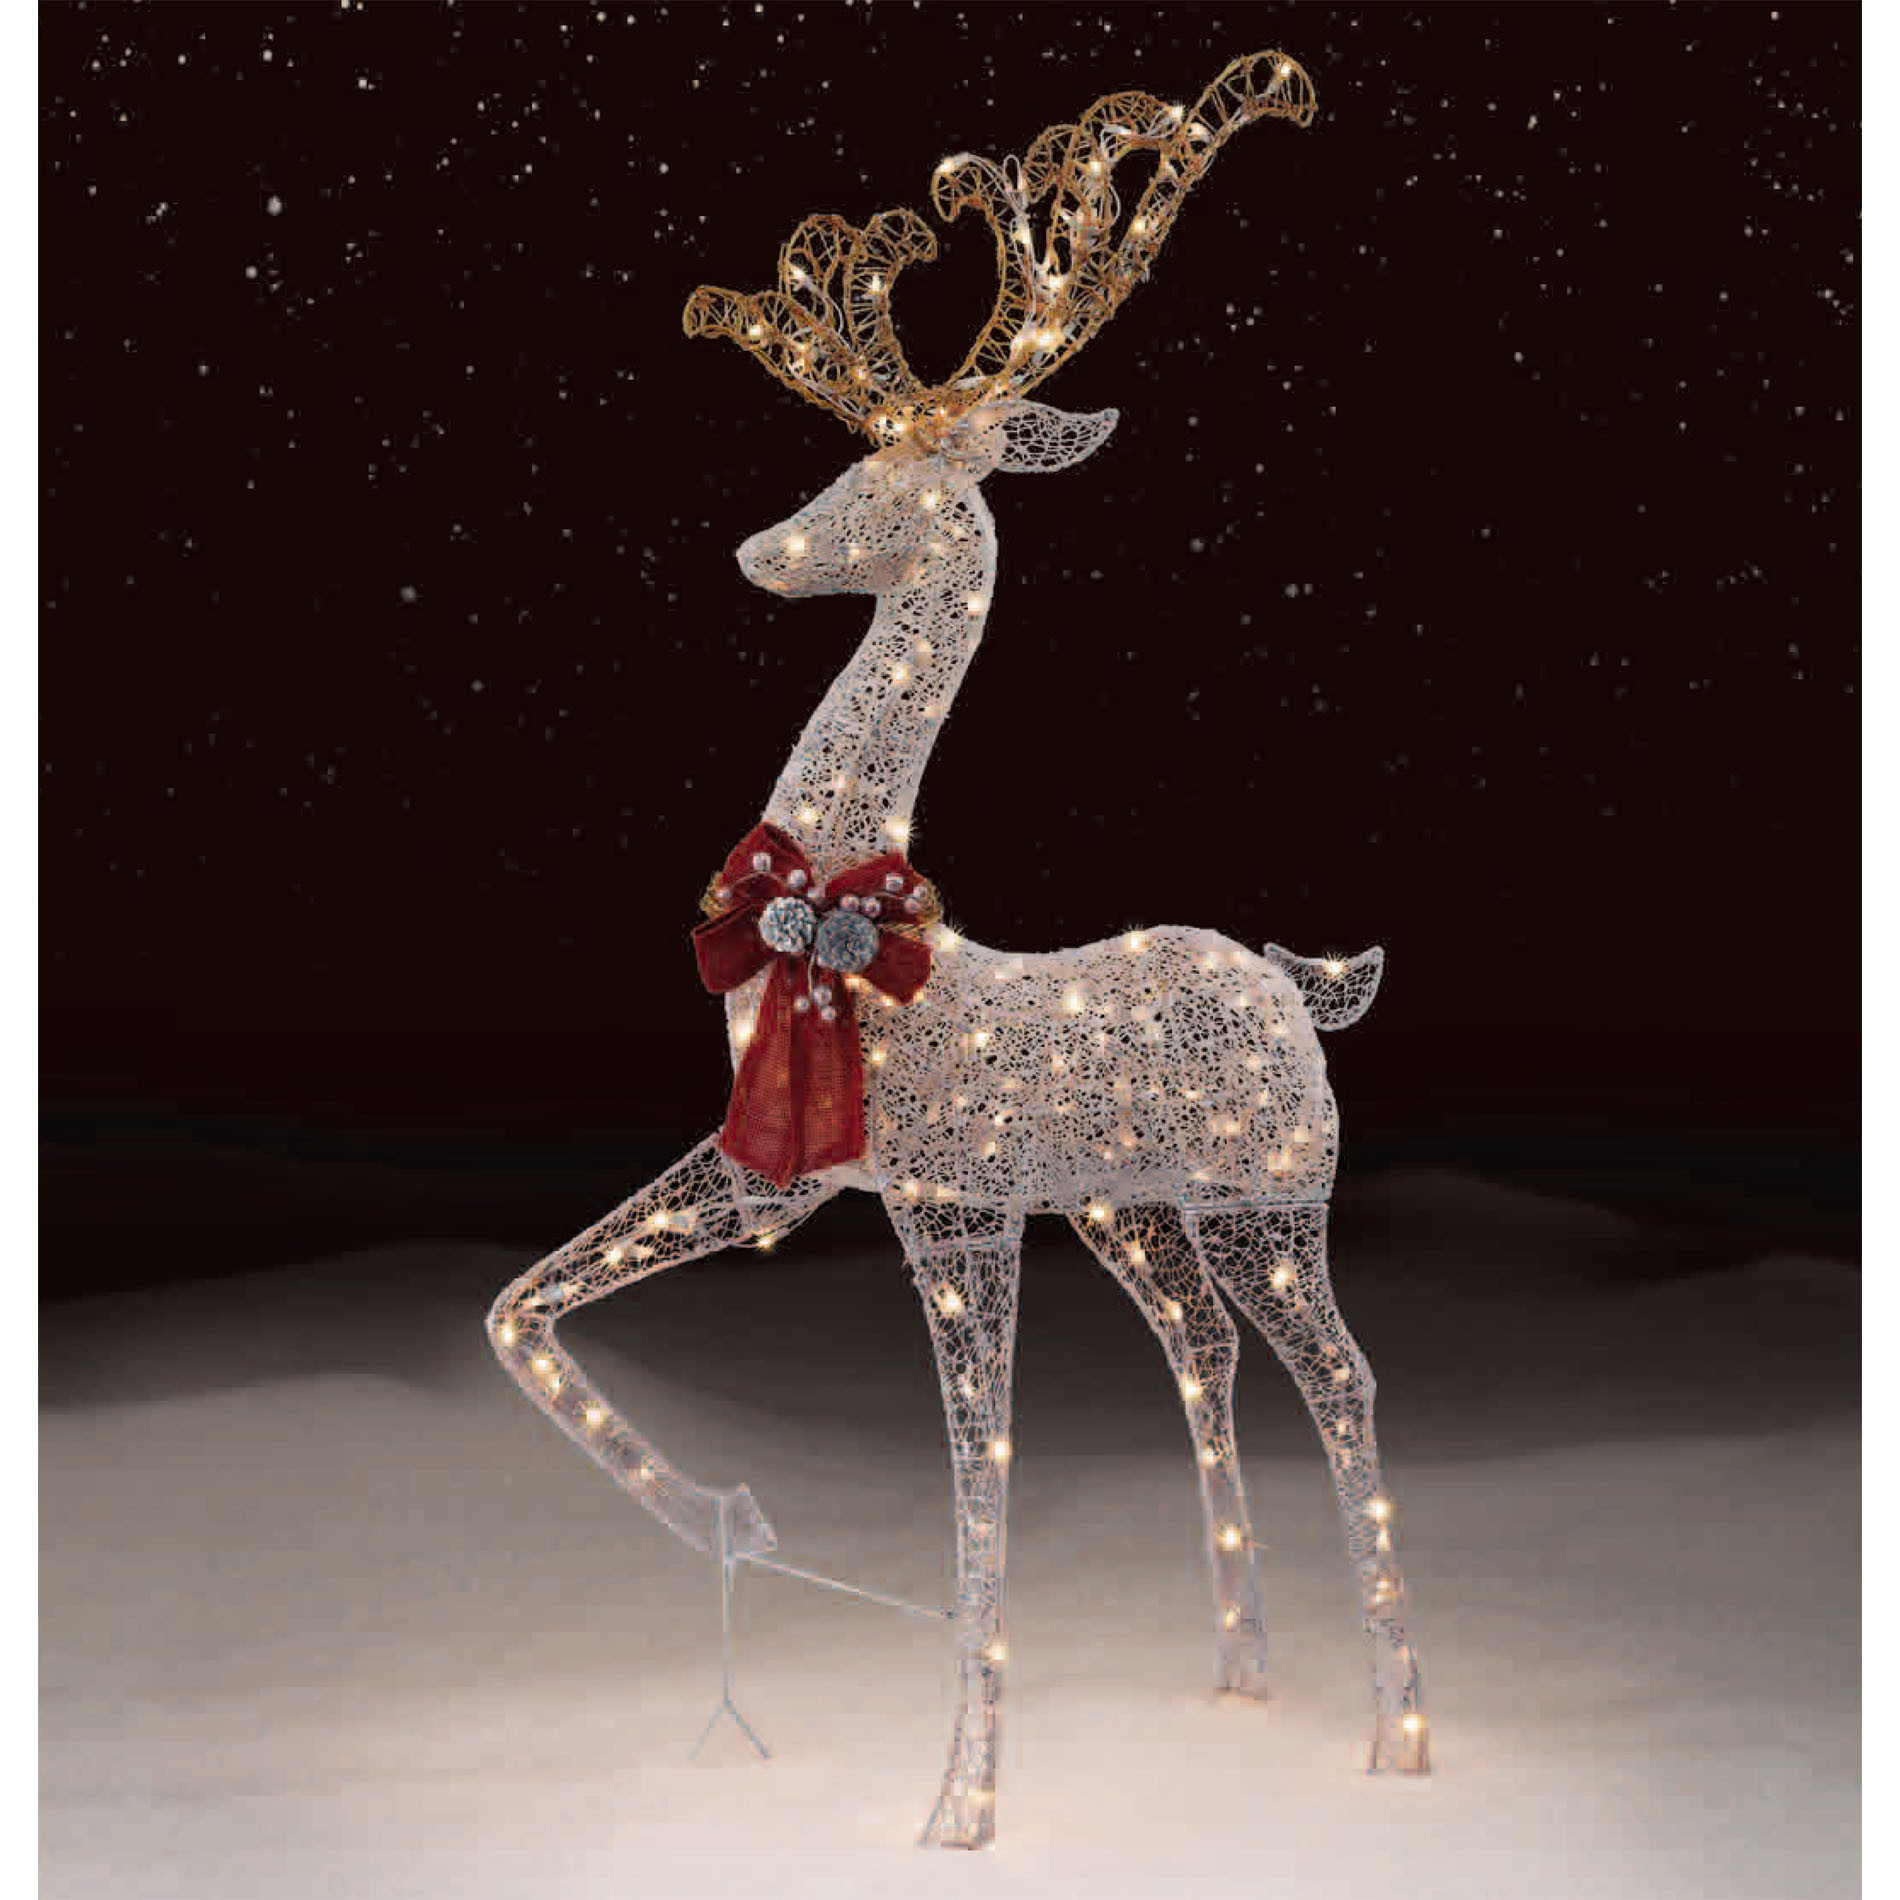 Outdoor Christmas Reindeer Lights
 Trimming Traditions Outdoor 200 Light Silver Mesh Standing